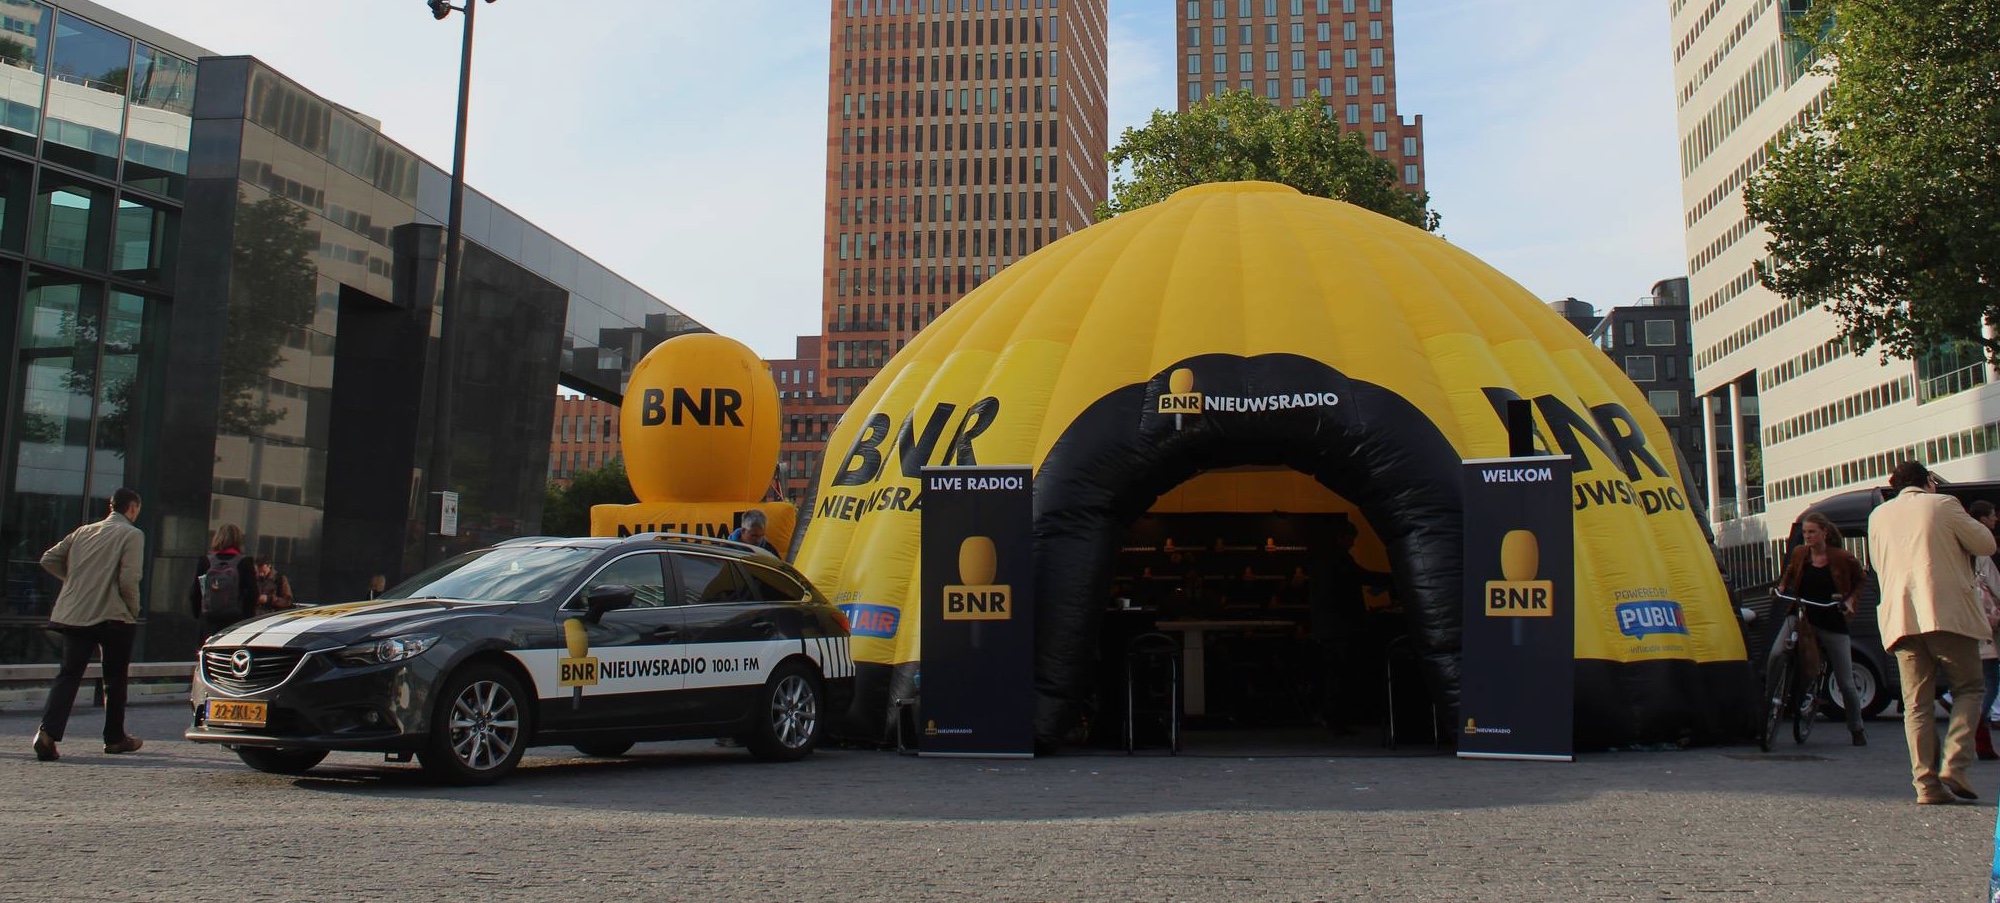 Opblaasbare tent dome tent custom inflatable tents - BNR - Publiair